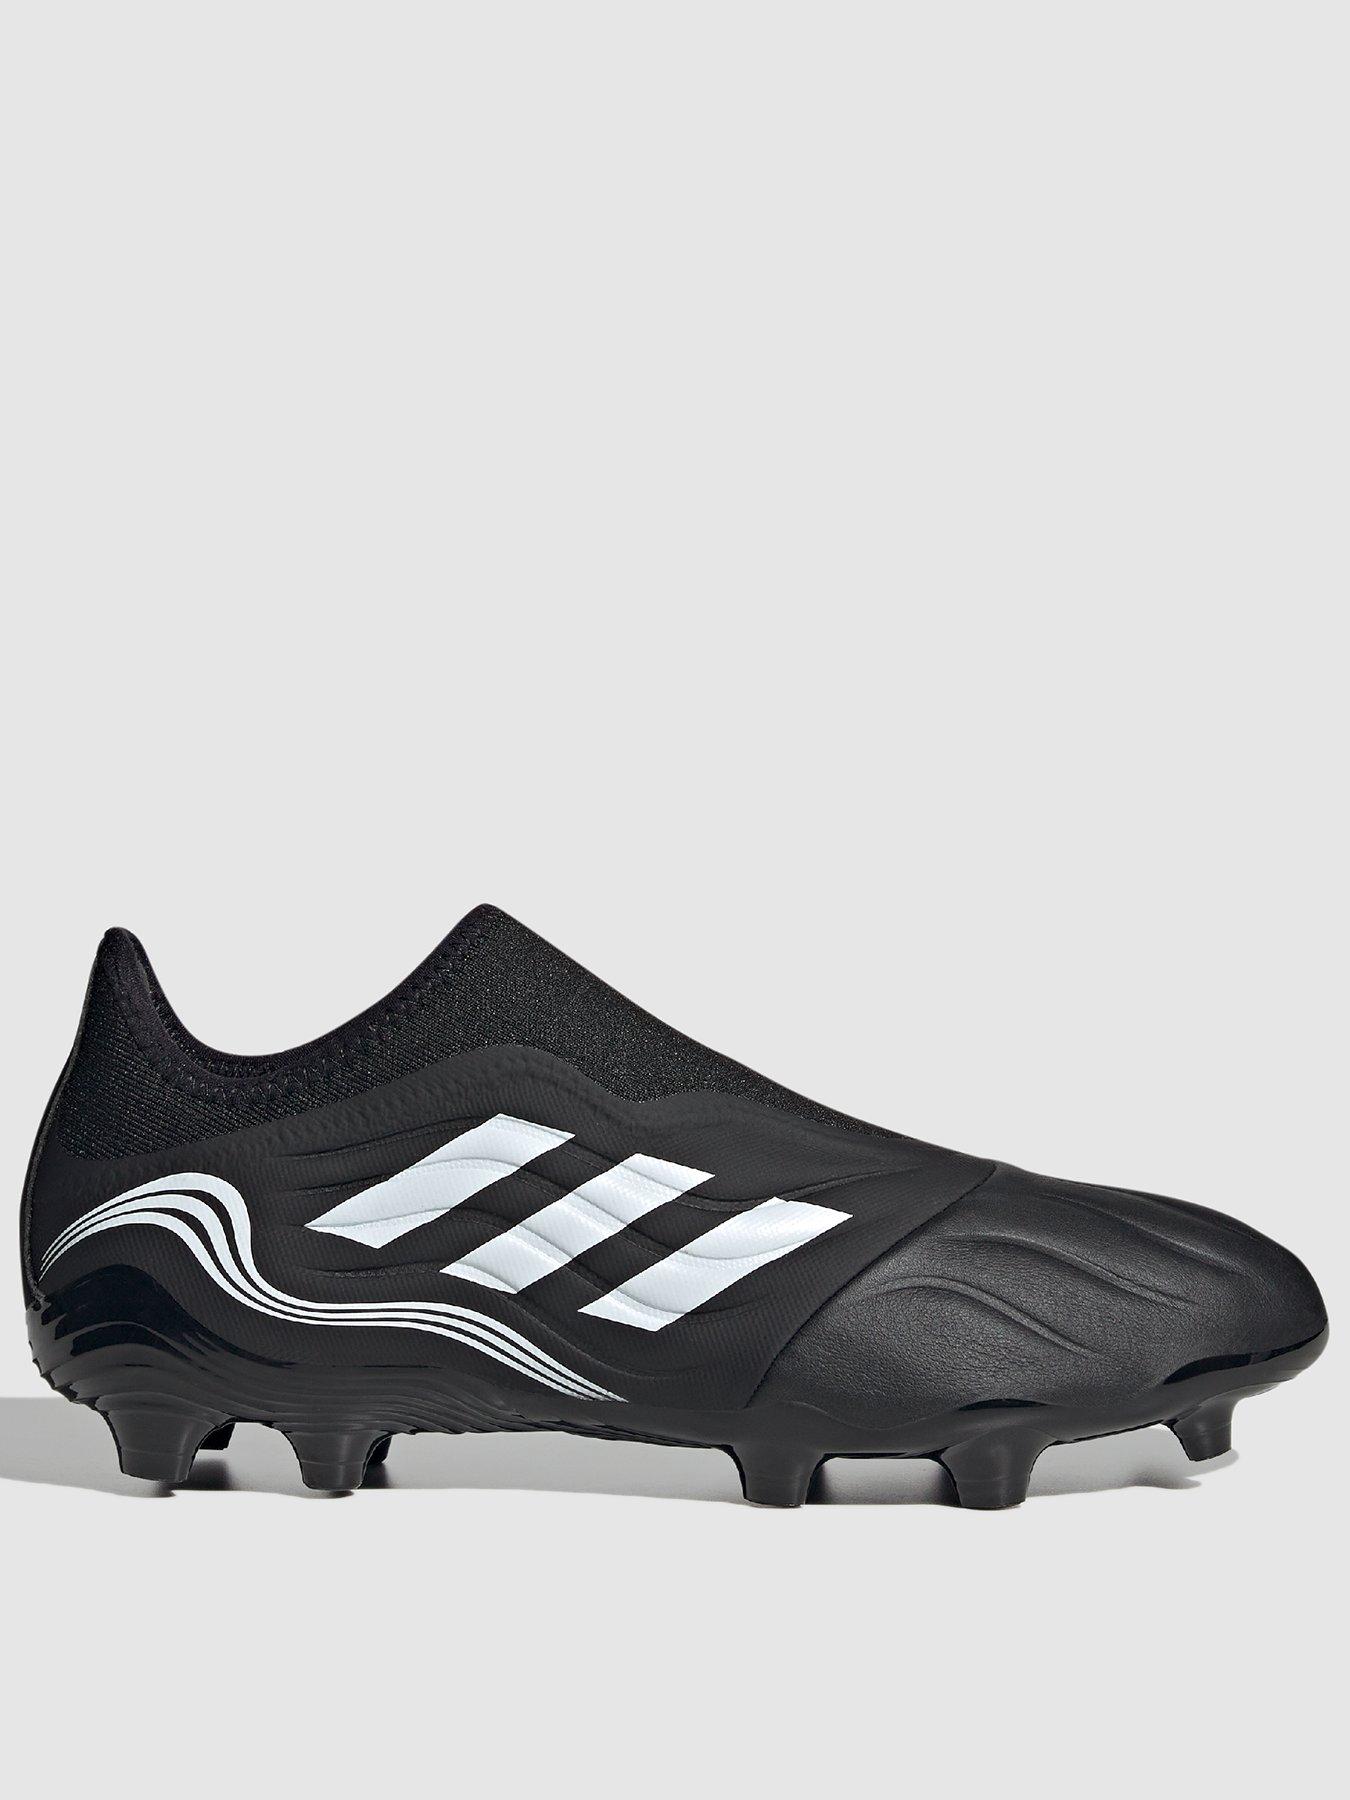 Men ADIDAS MENS COPA LACELESS .3 FIRM GROUND FOOTBALL BOOT